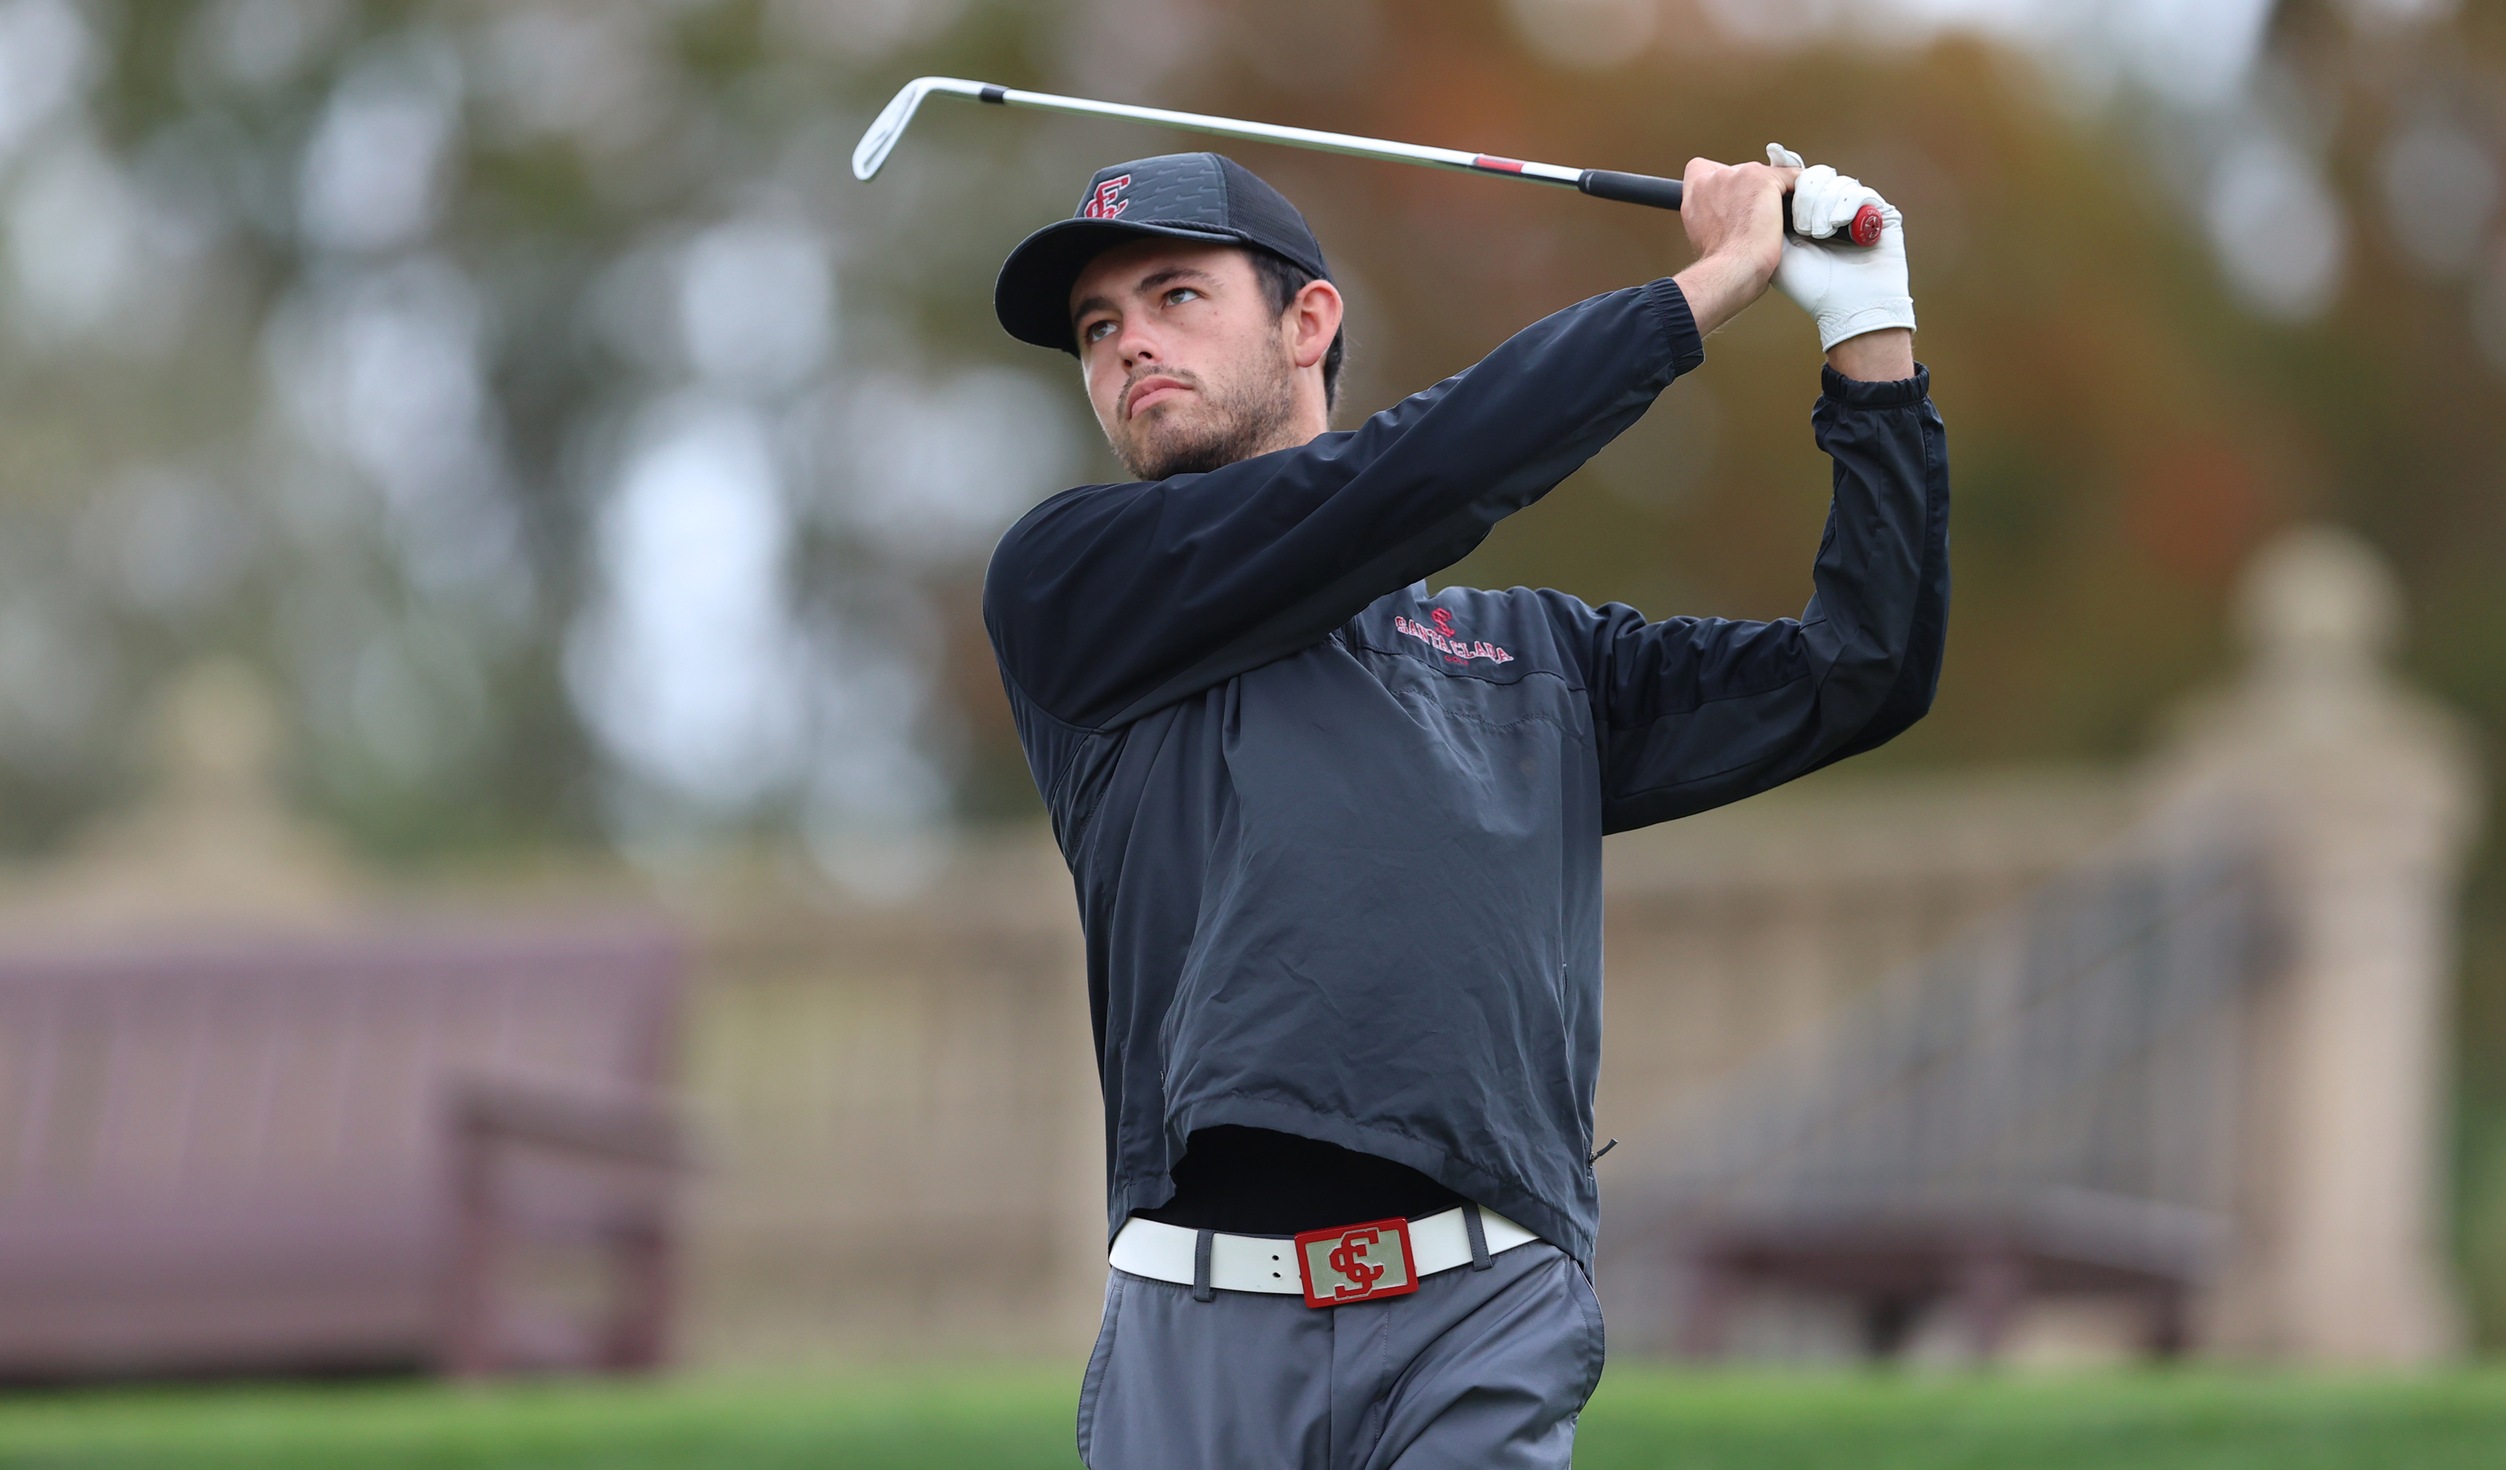 Avrit Leads Field, Broncos T-6th After Arizona Intercollegiate Opening Round